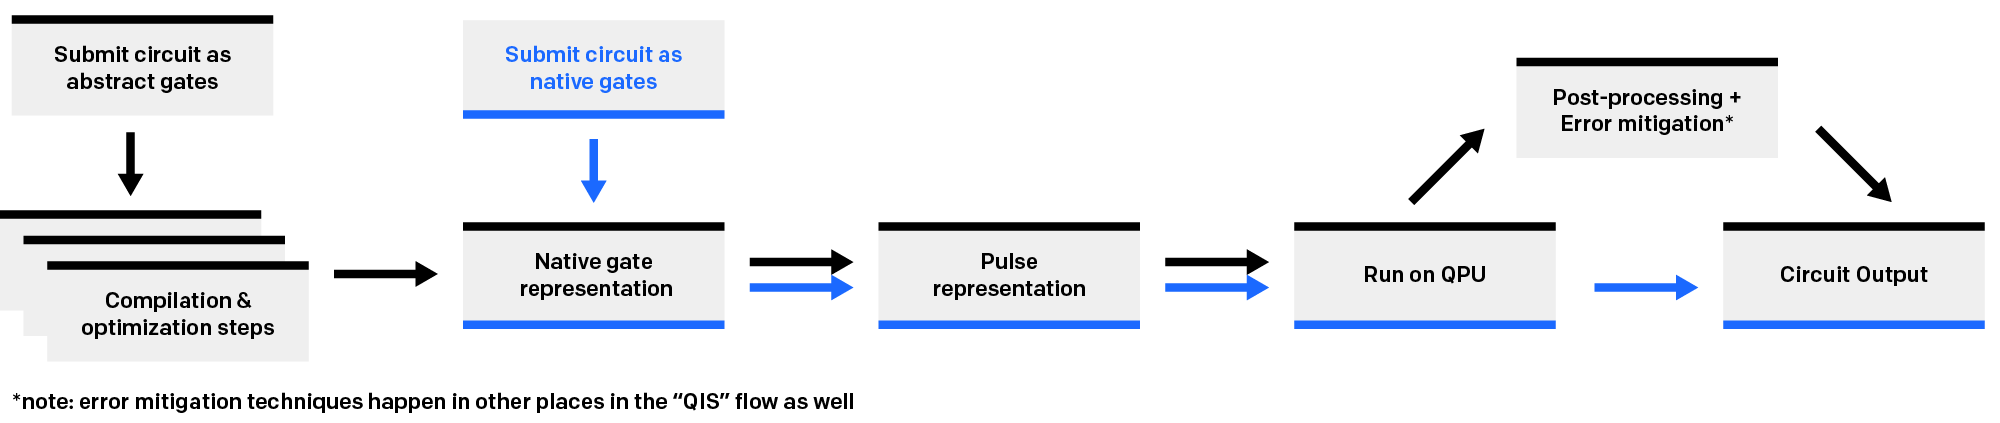 diagram of native gate flow bypassing compilation tools